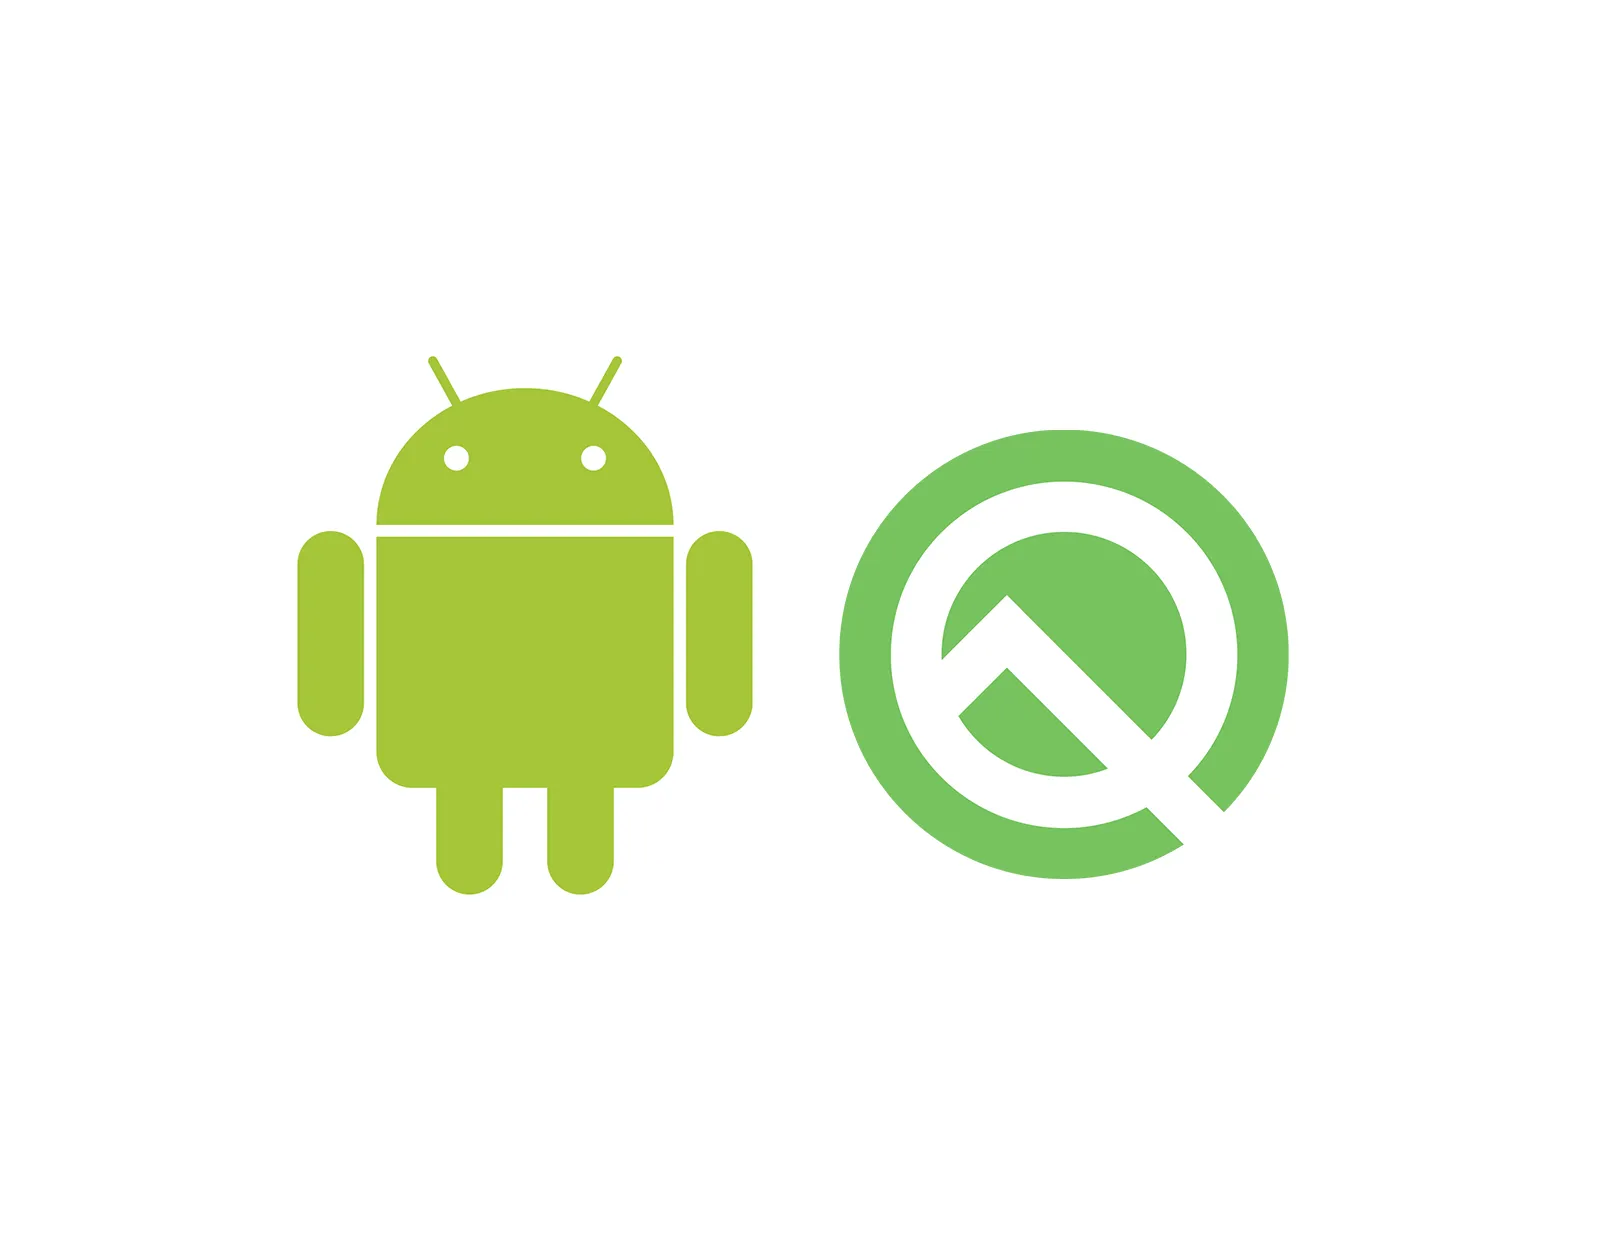 Android s android t. Логотип андроид. Логотип андроид q. Android 10 логотип. Андроид 10 q.